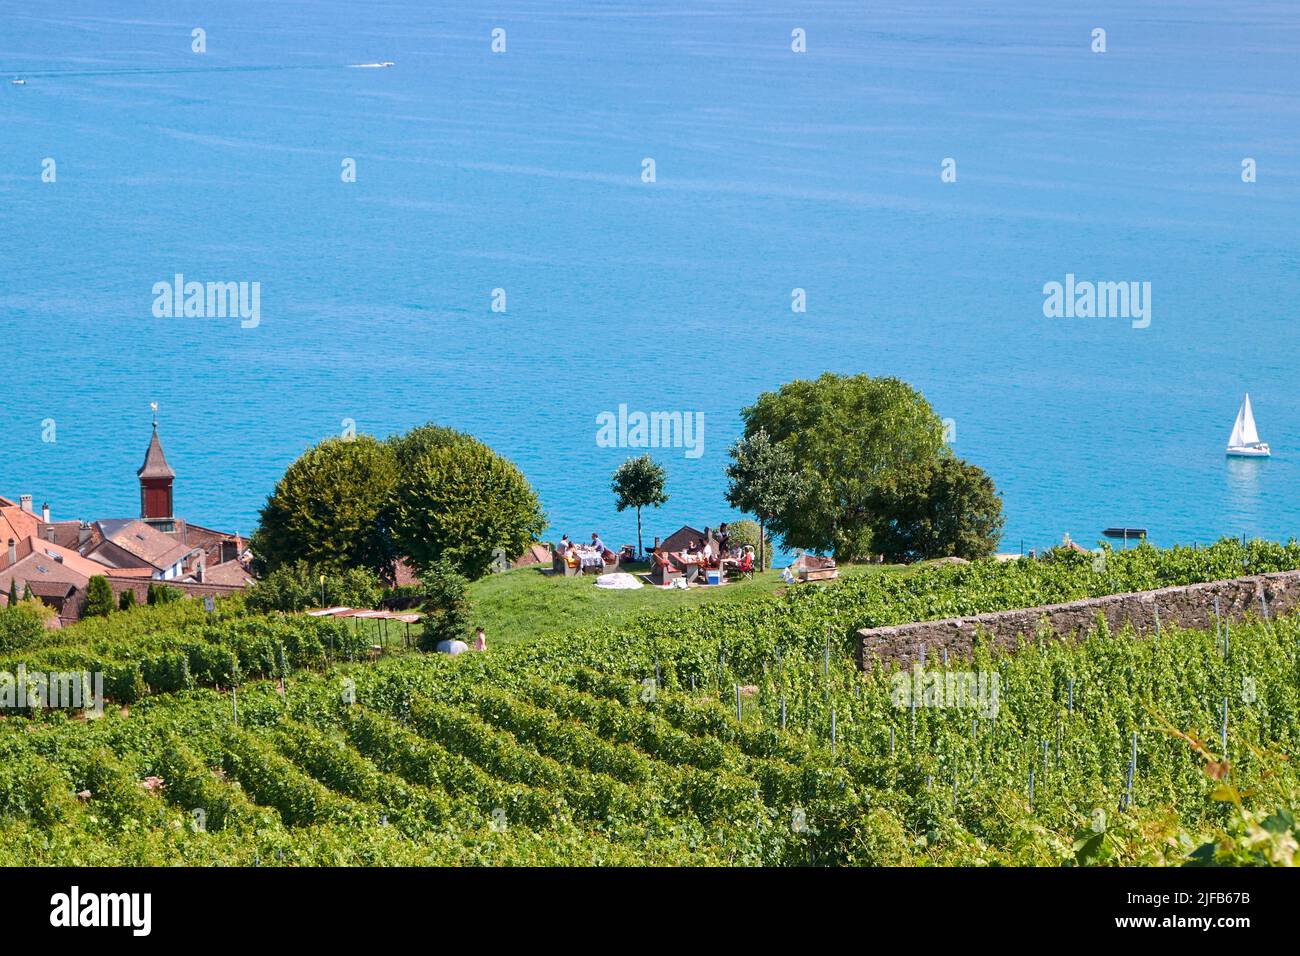 Switzerland, Canton of Vaud, Lavaux Vineyard Terraces listed as World Heritage by UNESCO, the village of Rivaz, the smallest municipality in Switzerland Stock Photo